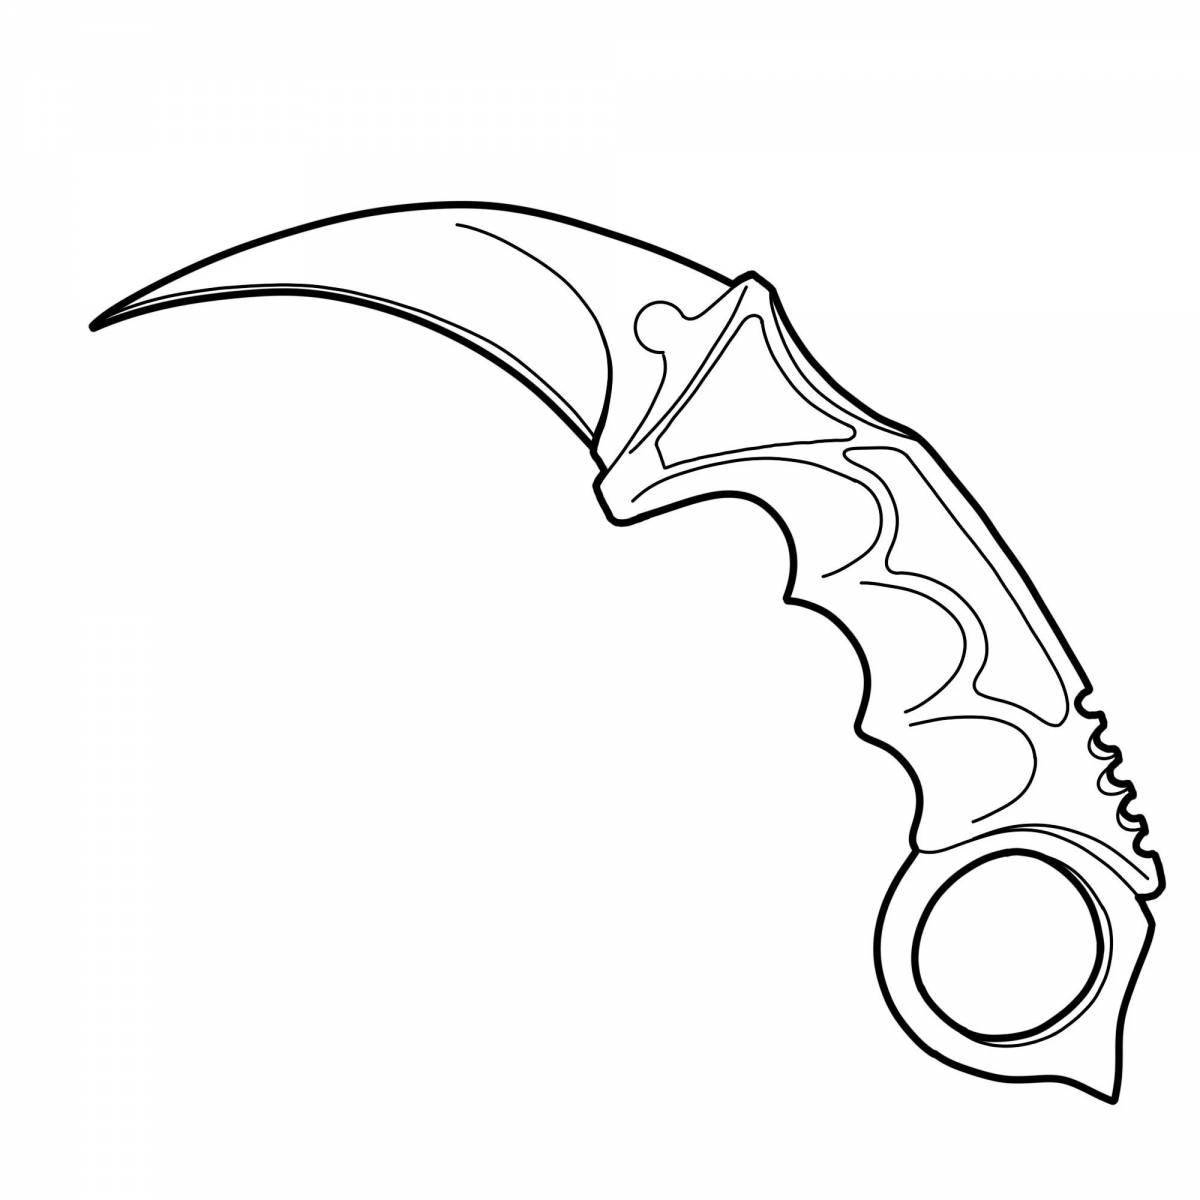 Coloring superb scorpion knife from standoff 2